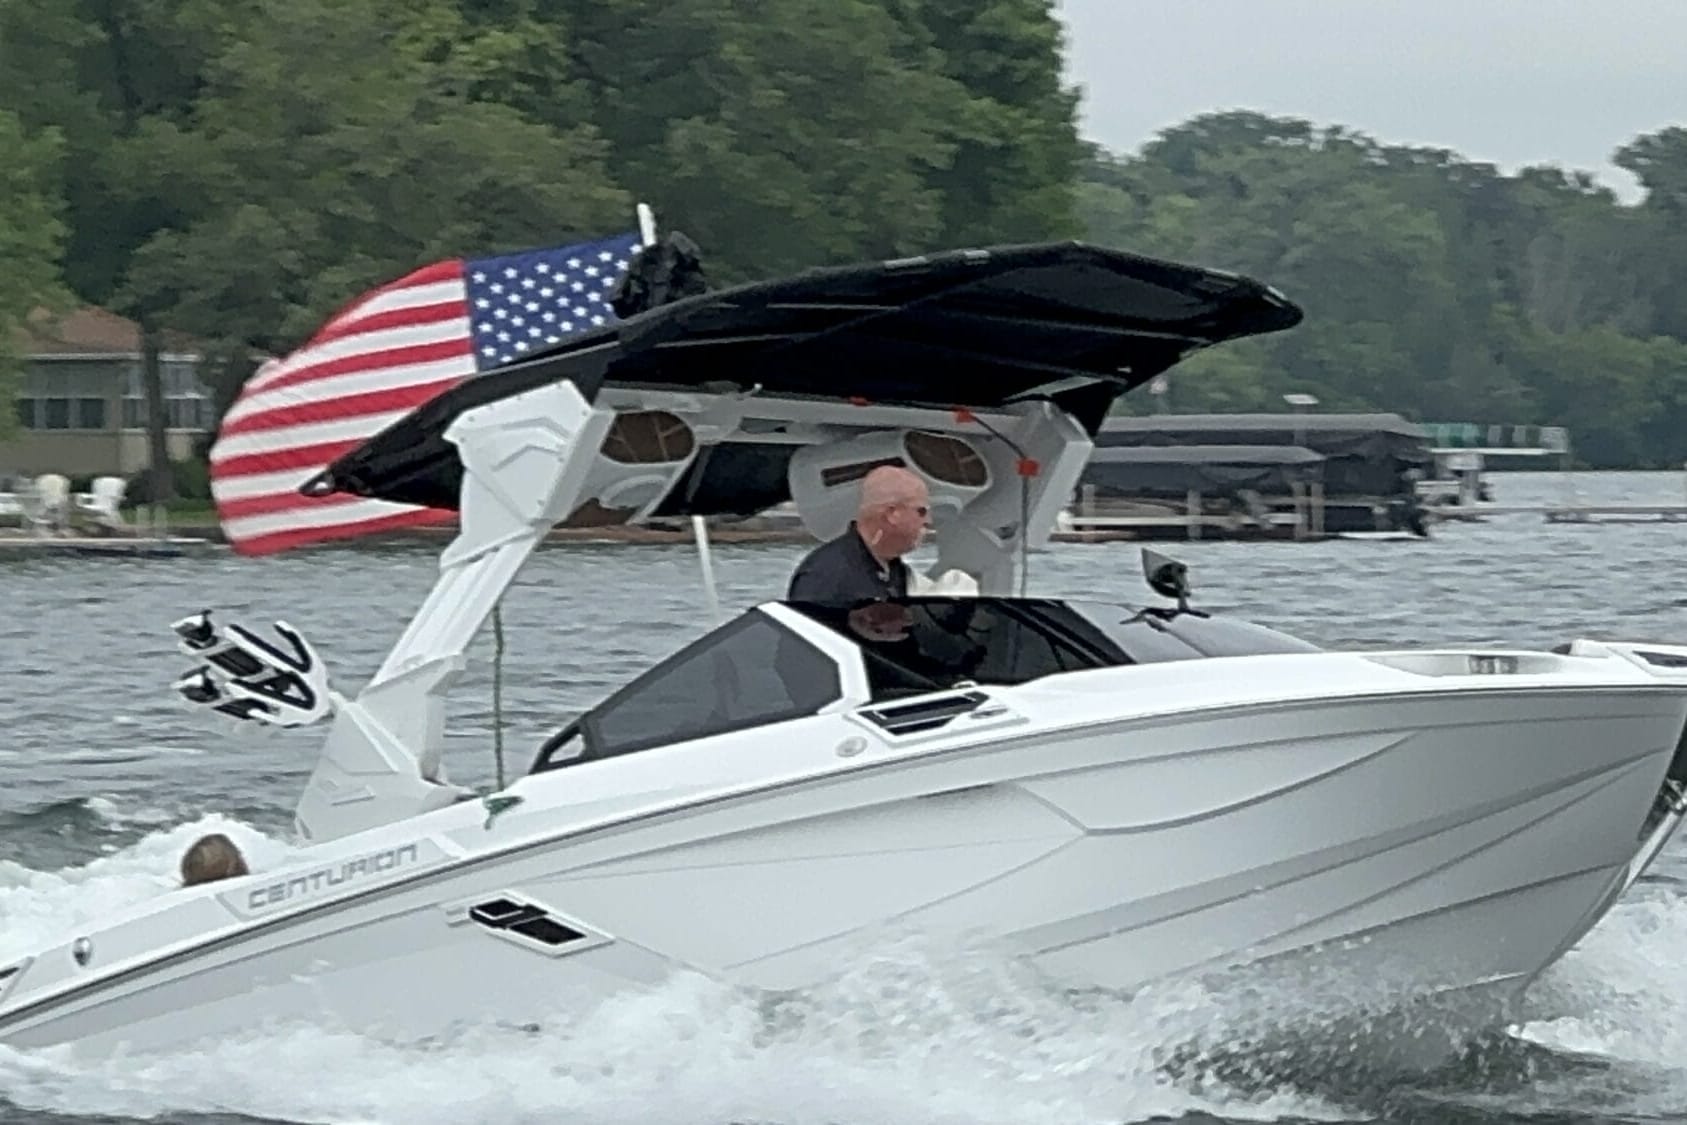 A person is driving a white Centurion boat on a lake. The boat has an American flag at the back, and there are trees and houses visible in the background.